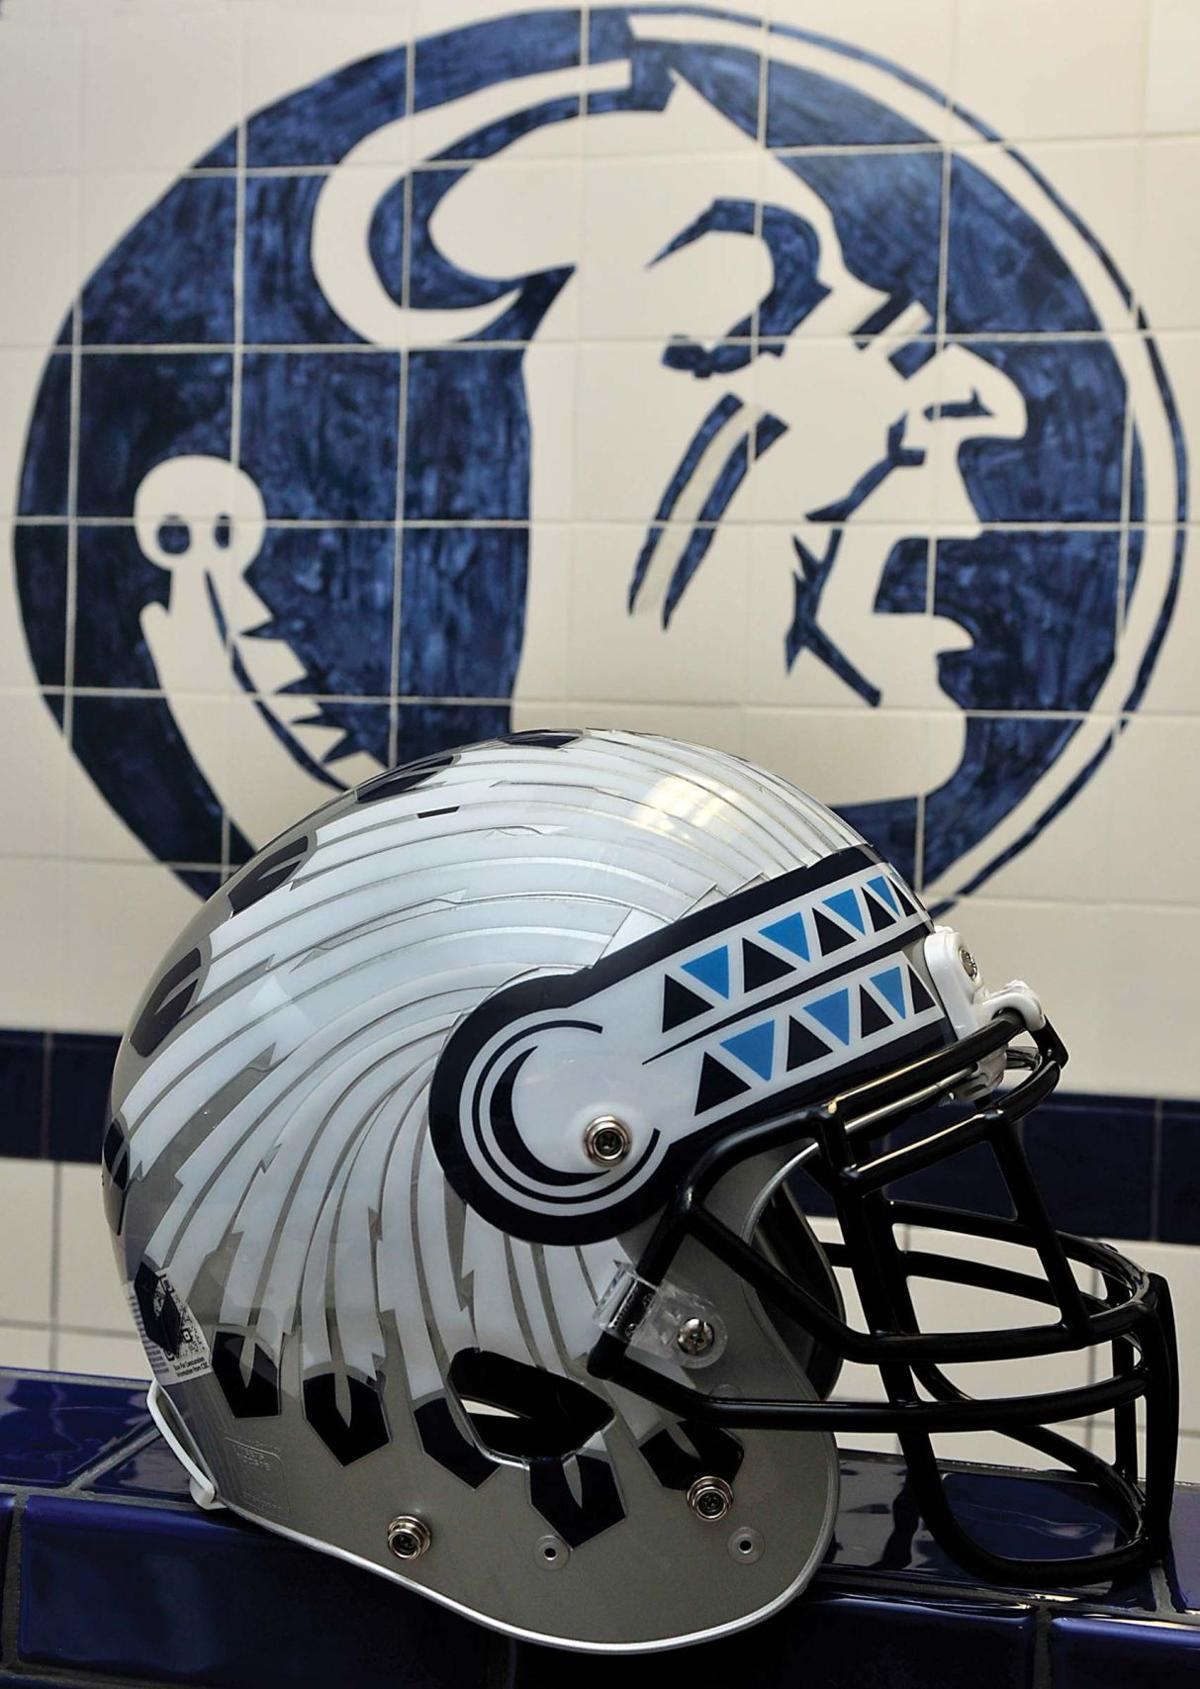 Plainsmen players will have to earn new helmet decal Sports